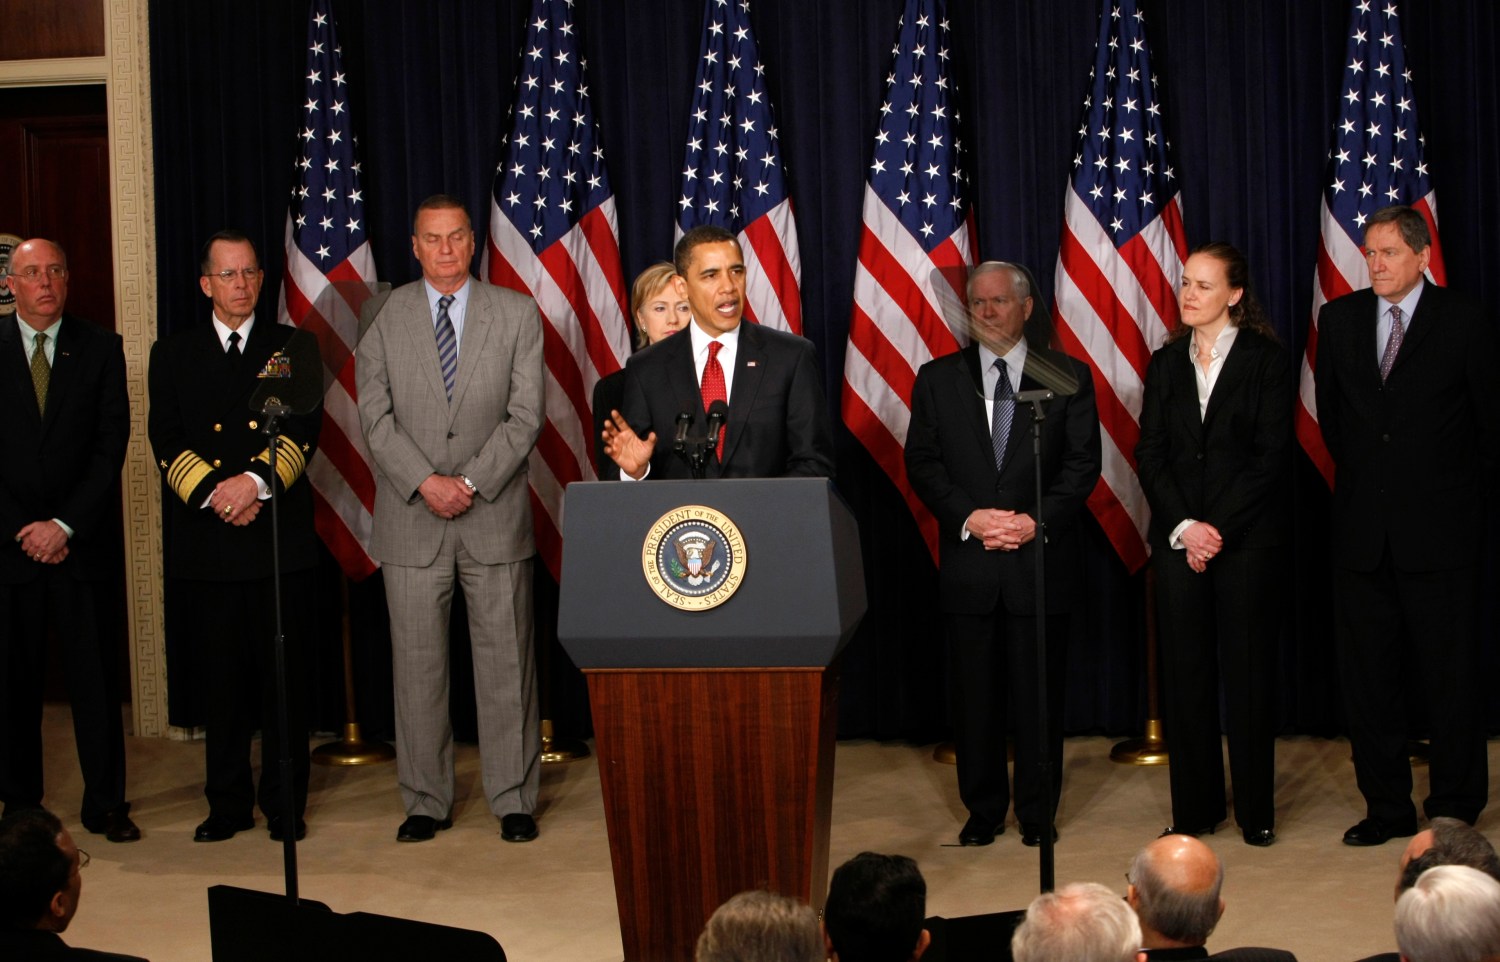 U.S. President Barack Obama (front) delivers remarks in Washington announcing a comprehensive, new strategy for Afghanistan and Pakistan March 27, 2009. Standing behind Obama (L-R) are advisor Bruce Riedel, Commander of the Joint Chiefs of Staff Mike Mullen, National Security Advisor James Jones, Secretary of State Hillary Clinton, Secretary of Defense Robert Gates, Under Secretary of Defense for Policy Michele Flournoy and Special Envoy to Afghanistan Richard Holbrooke. REUTERS/Kevin Lamarque (UNITED STATES POLITICS) - RTXDA7R